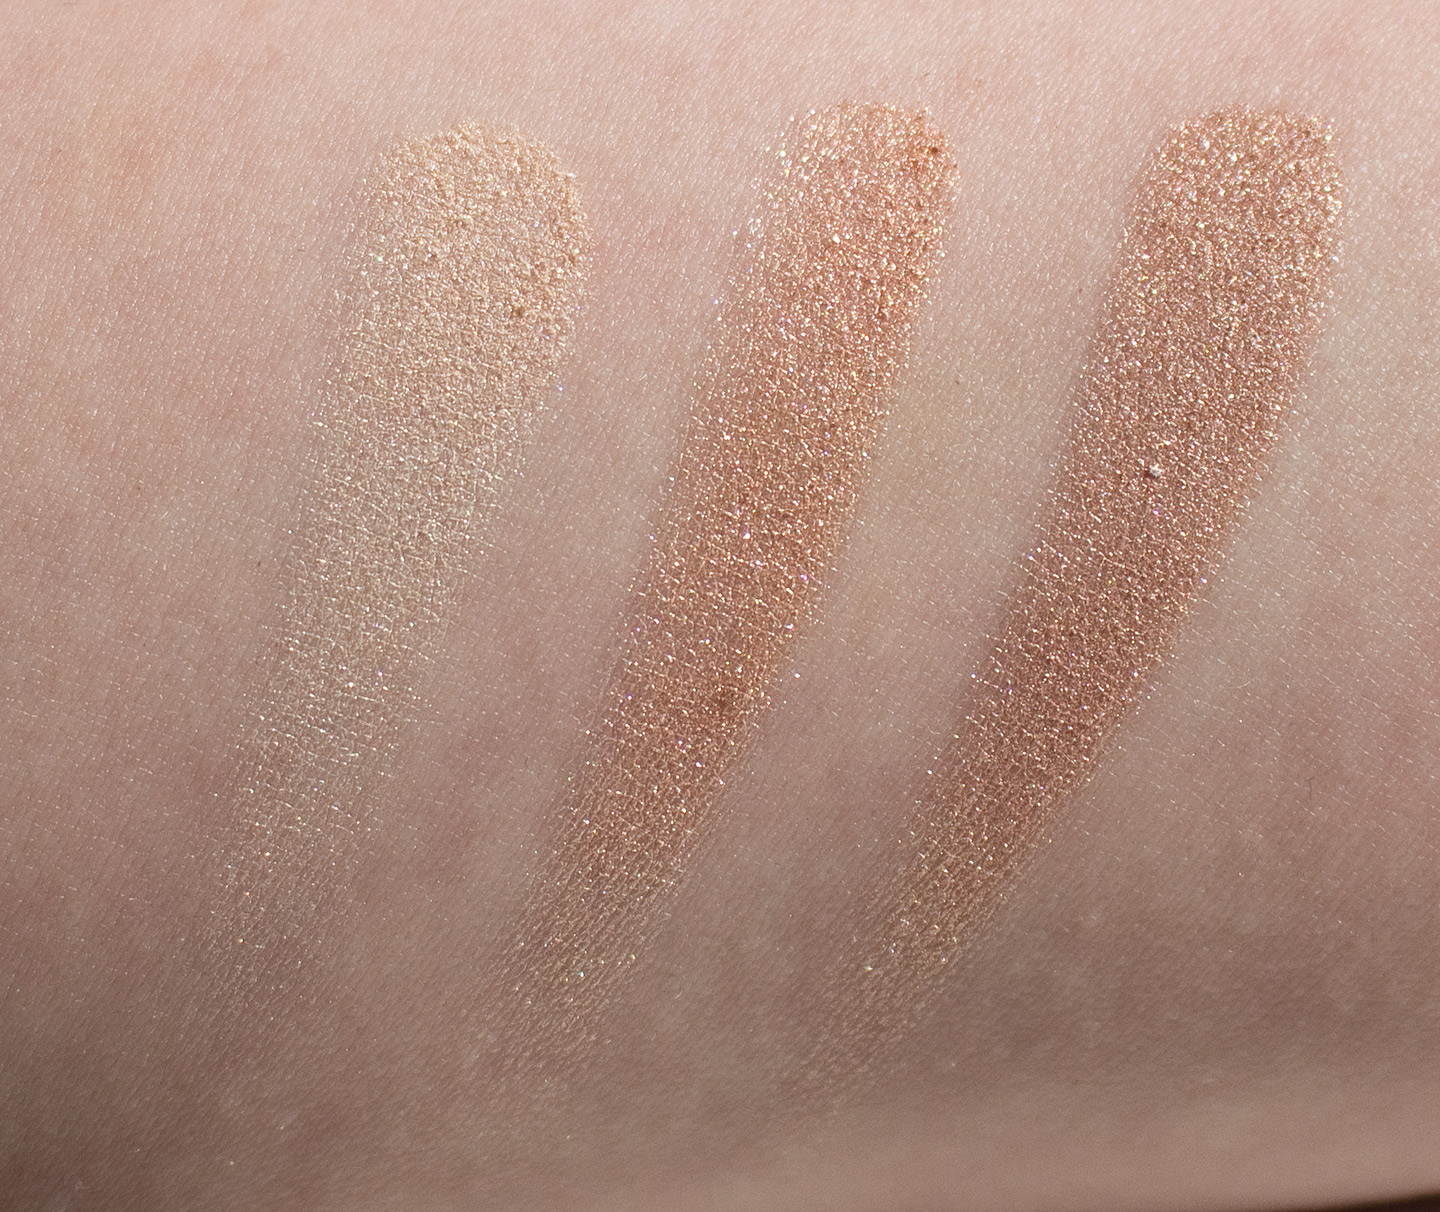 WARPAINT and Unicorns: BECCA Shimmering Skin Perfector in Champagne Pop : Swatches Review